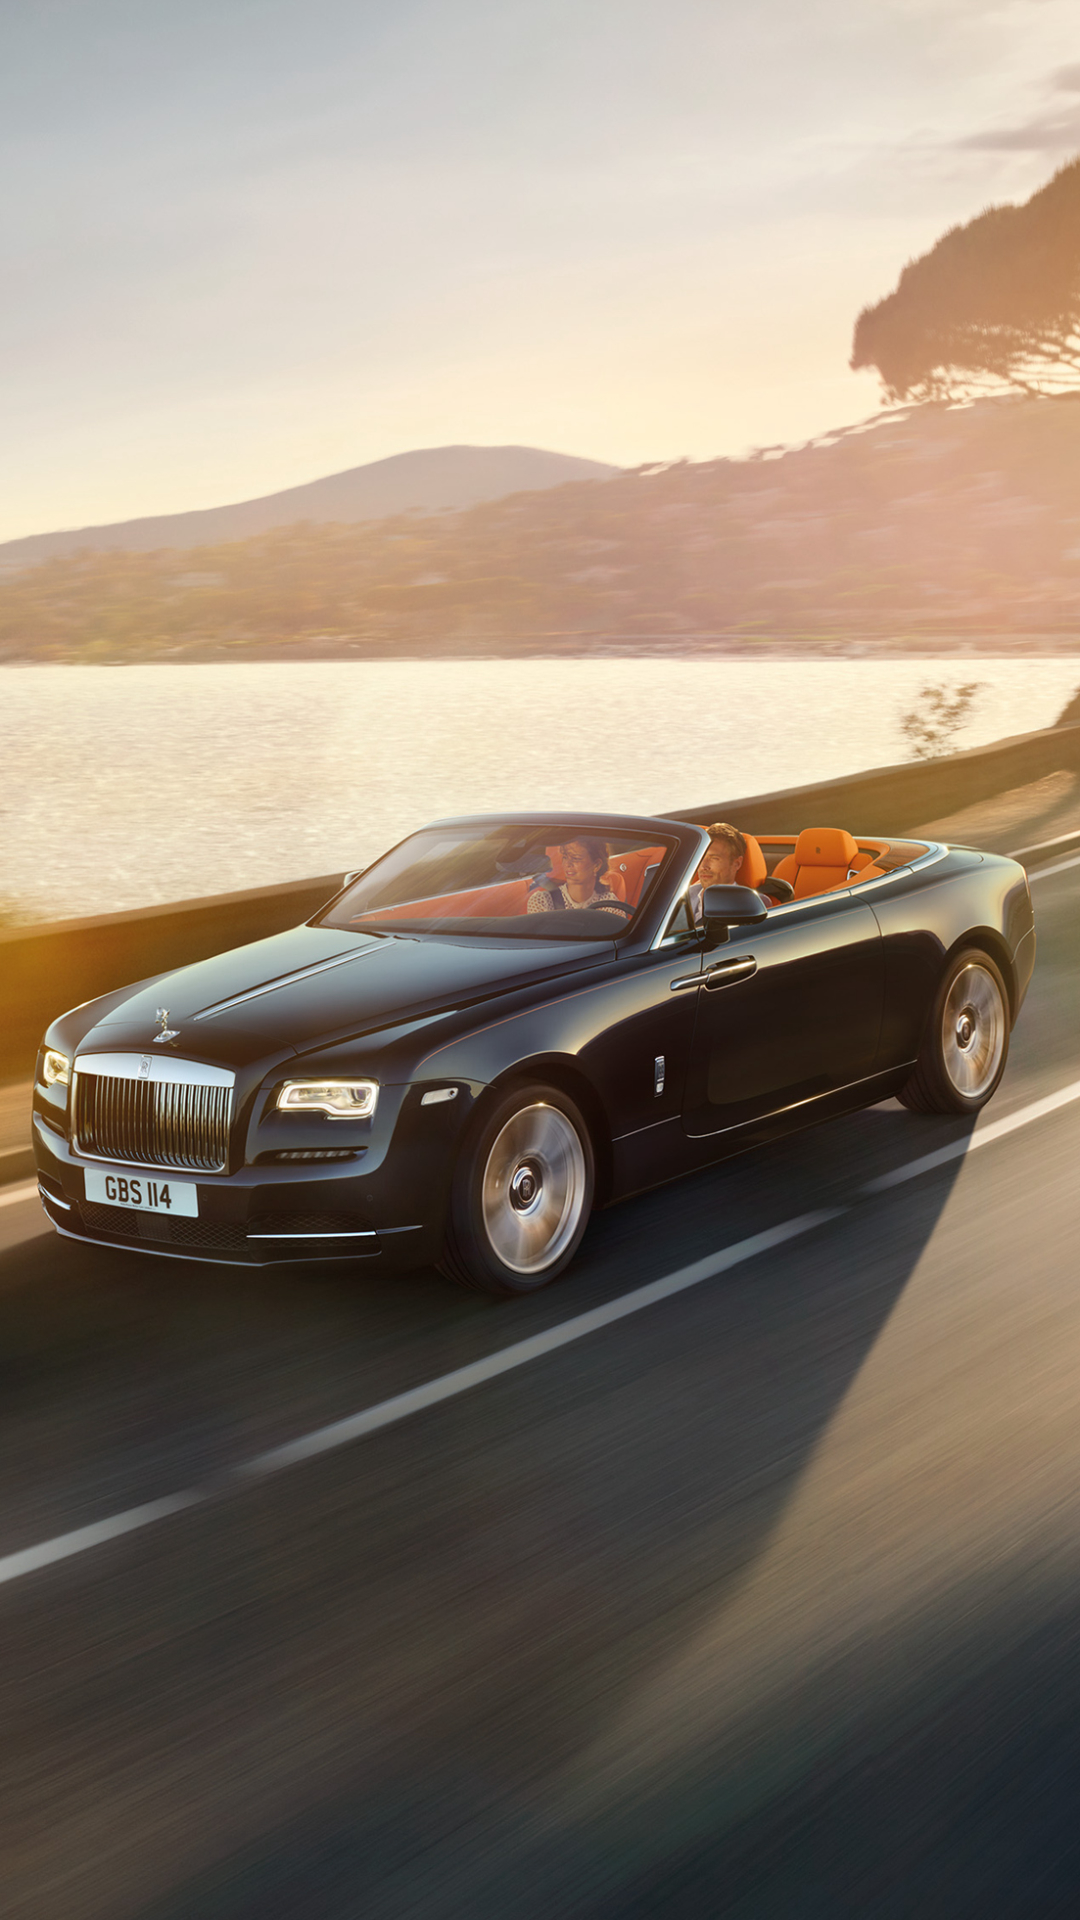 rolls royce, rolls royce dawn, vehicles, black car, vehicle, grand tourer, car wallpapers for tablet